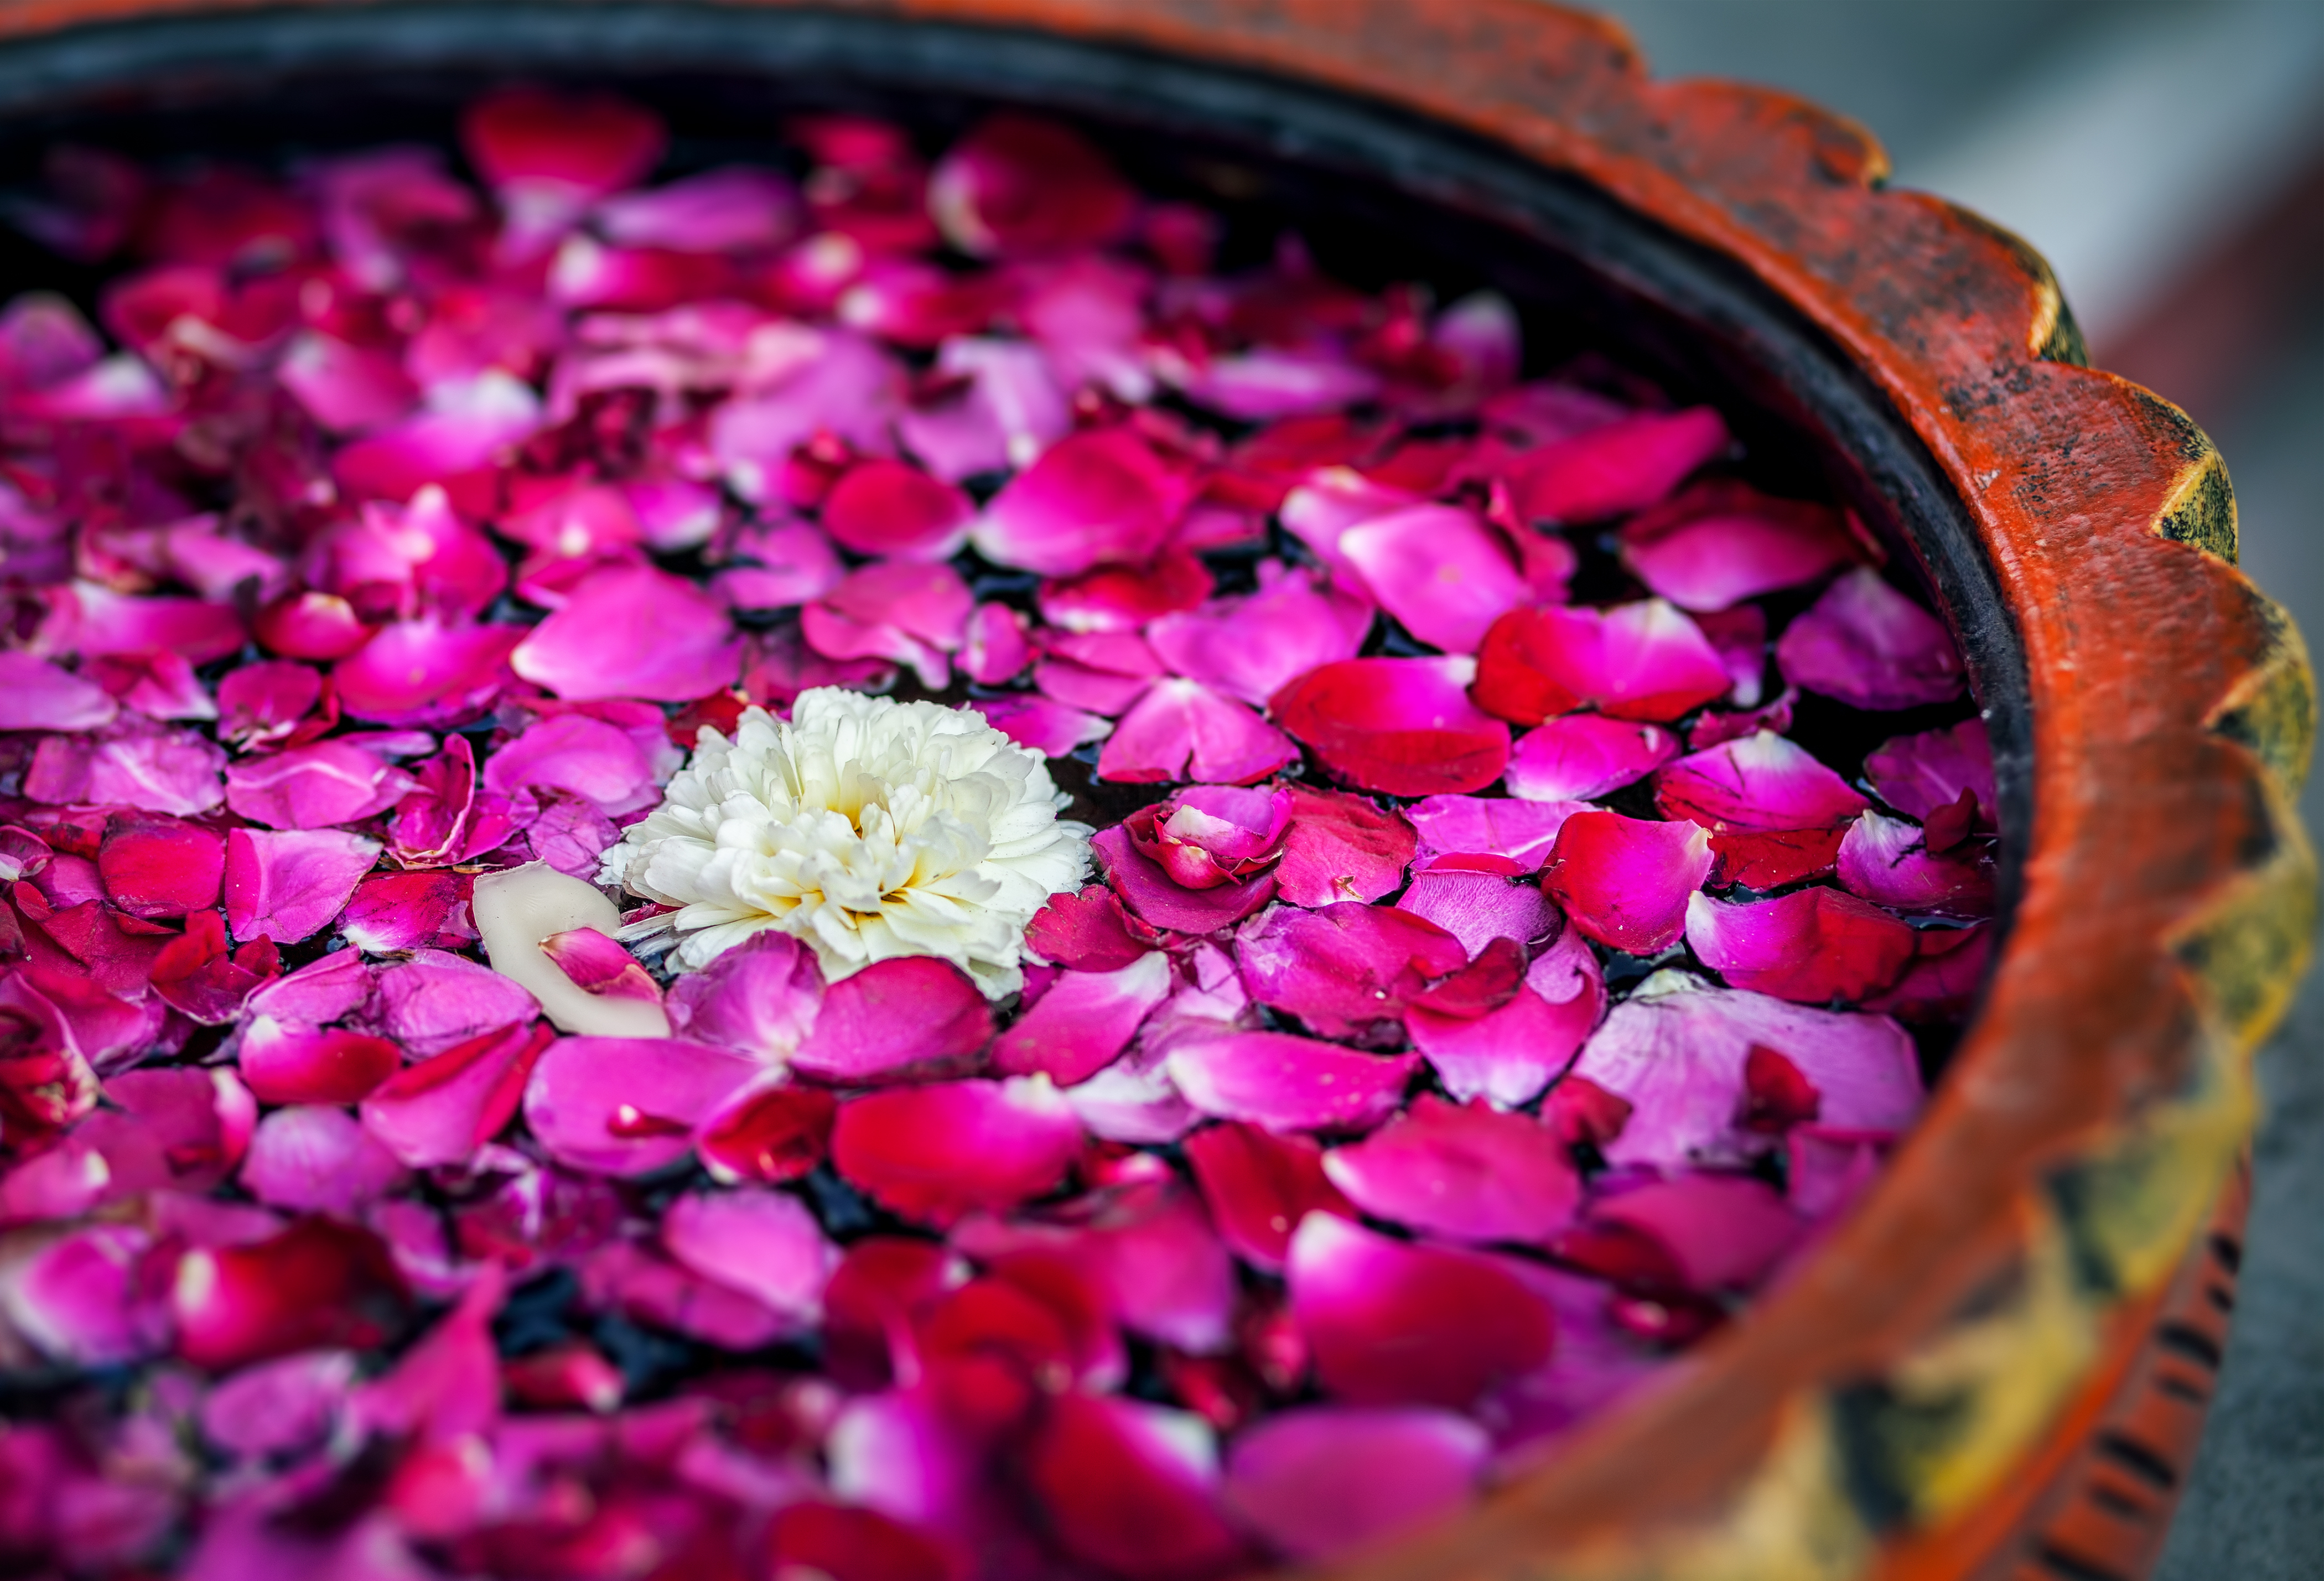 Pink flower petals in a bowl, India